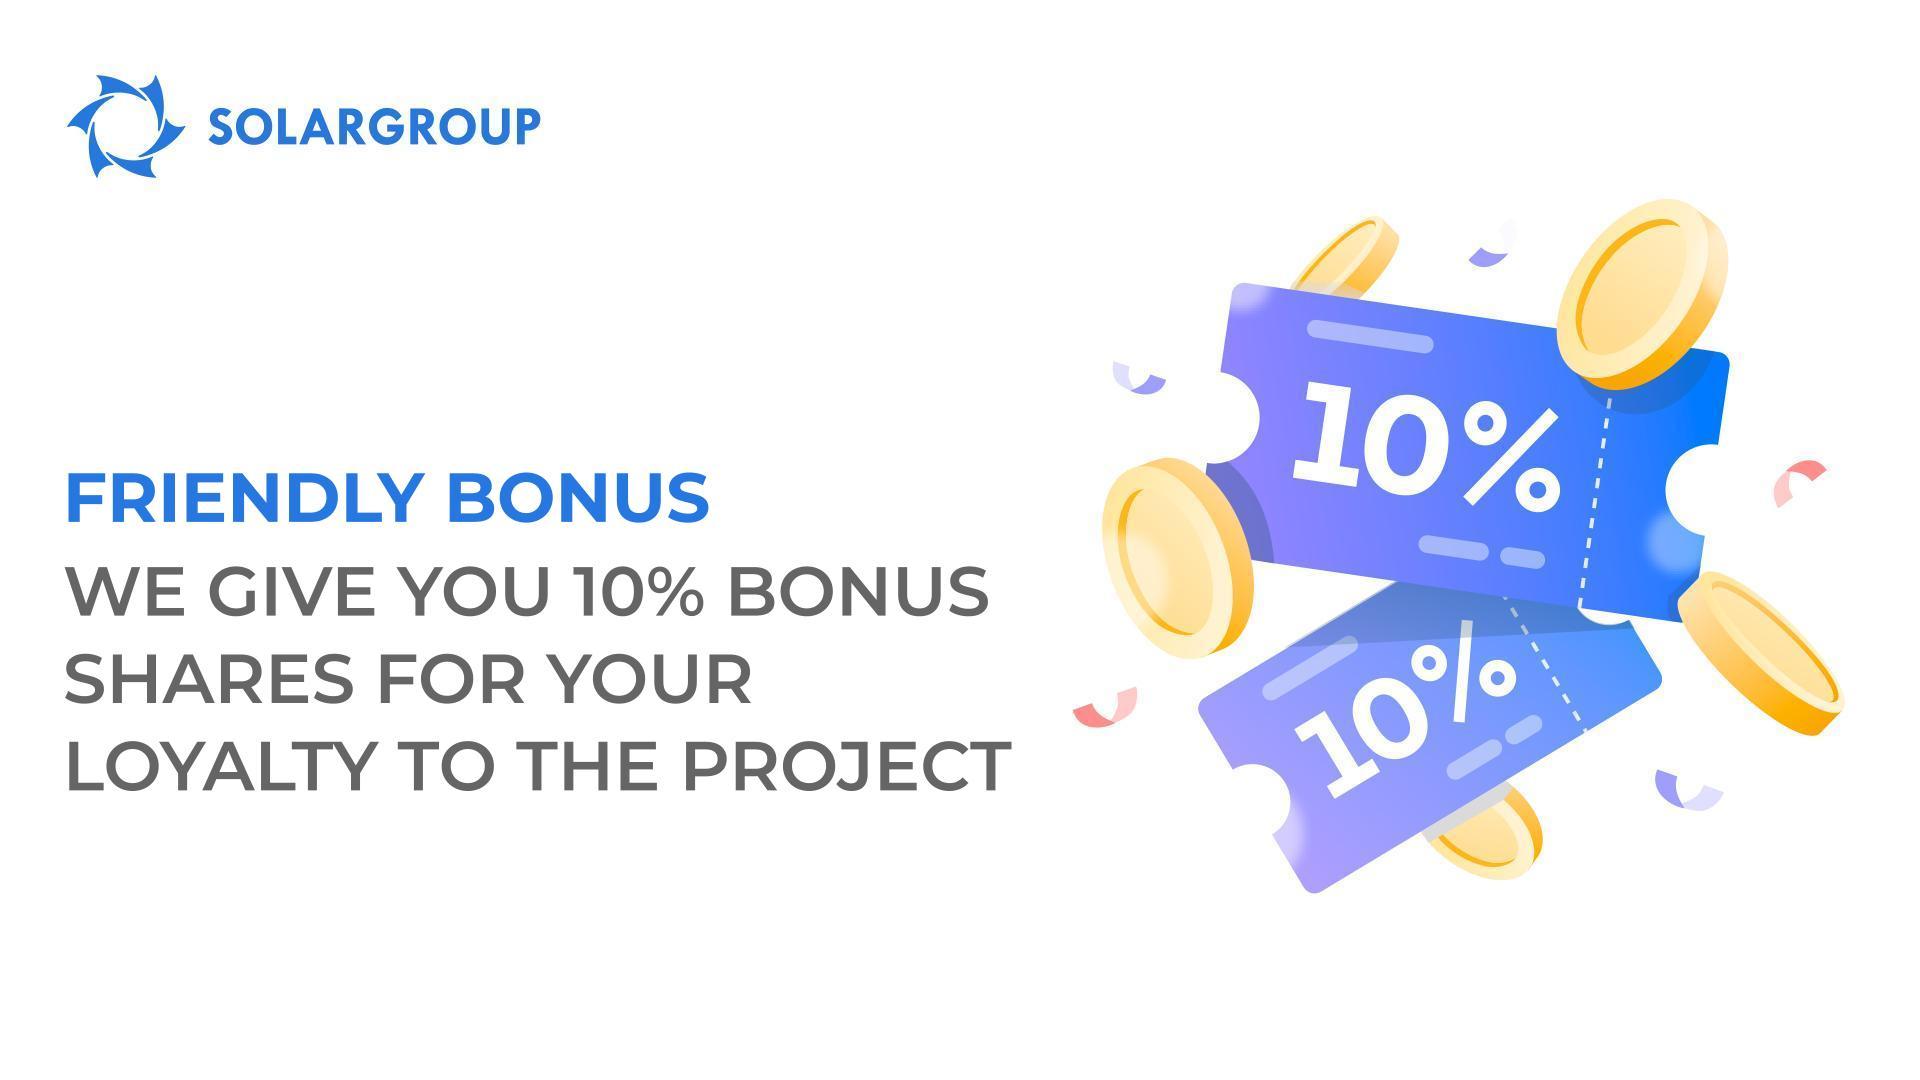 Pay for your investment package in full - and get the Friendly Bonus